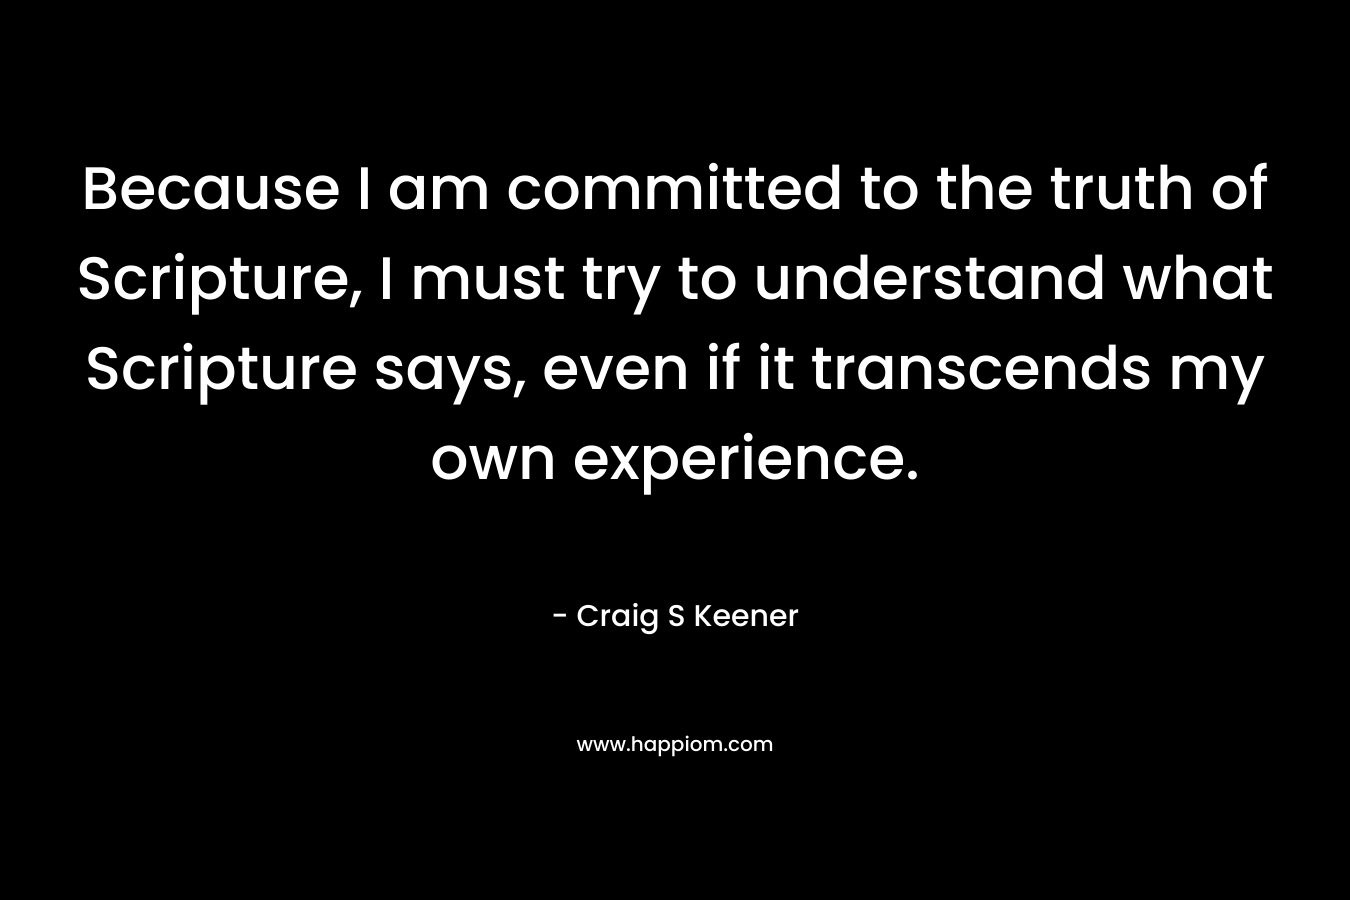 Because I am committed to the truth of Scripture, I must try to understand what Scripture says, even if it transcends my own experience. – Craig S Keener